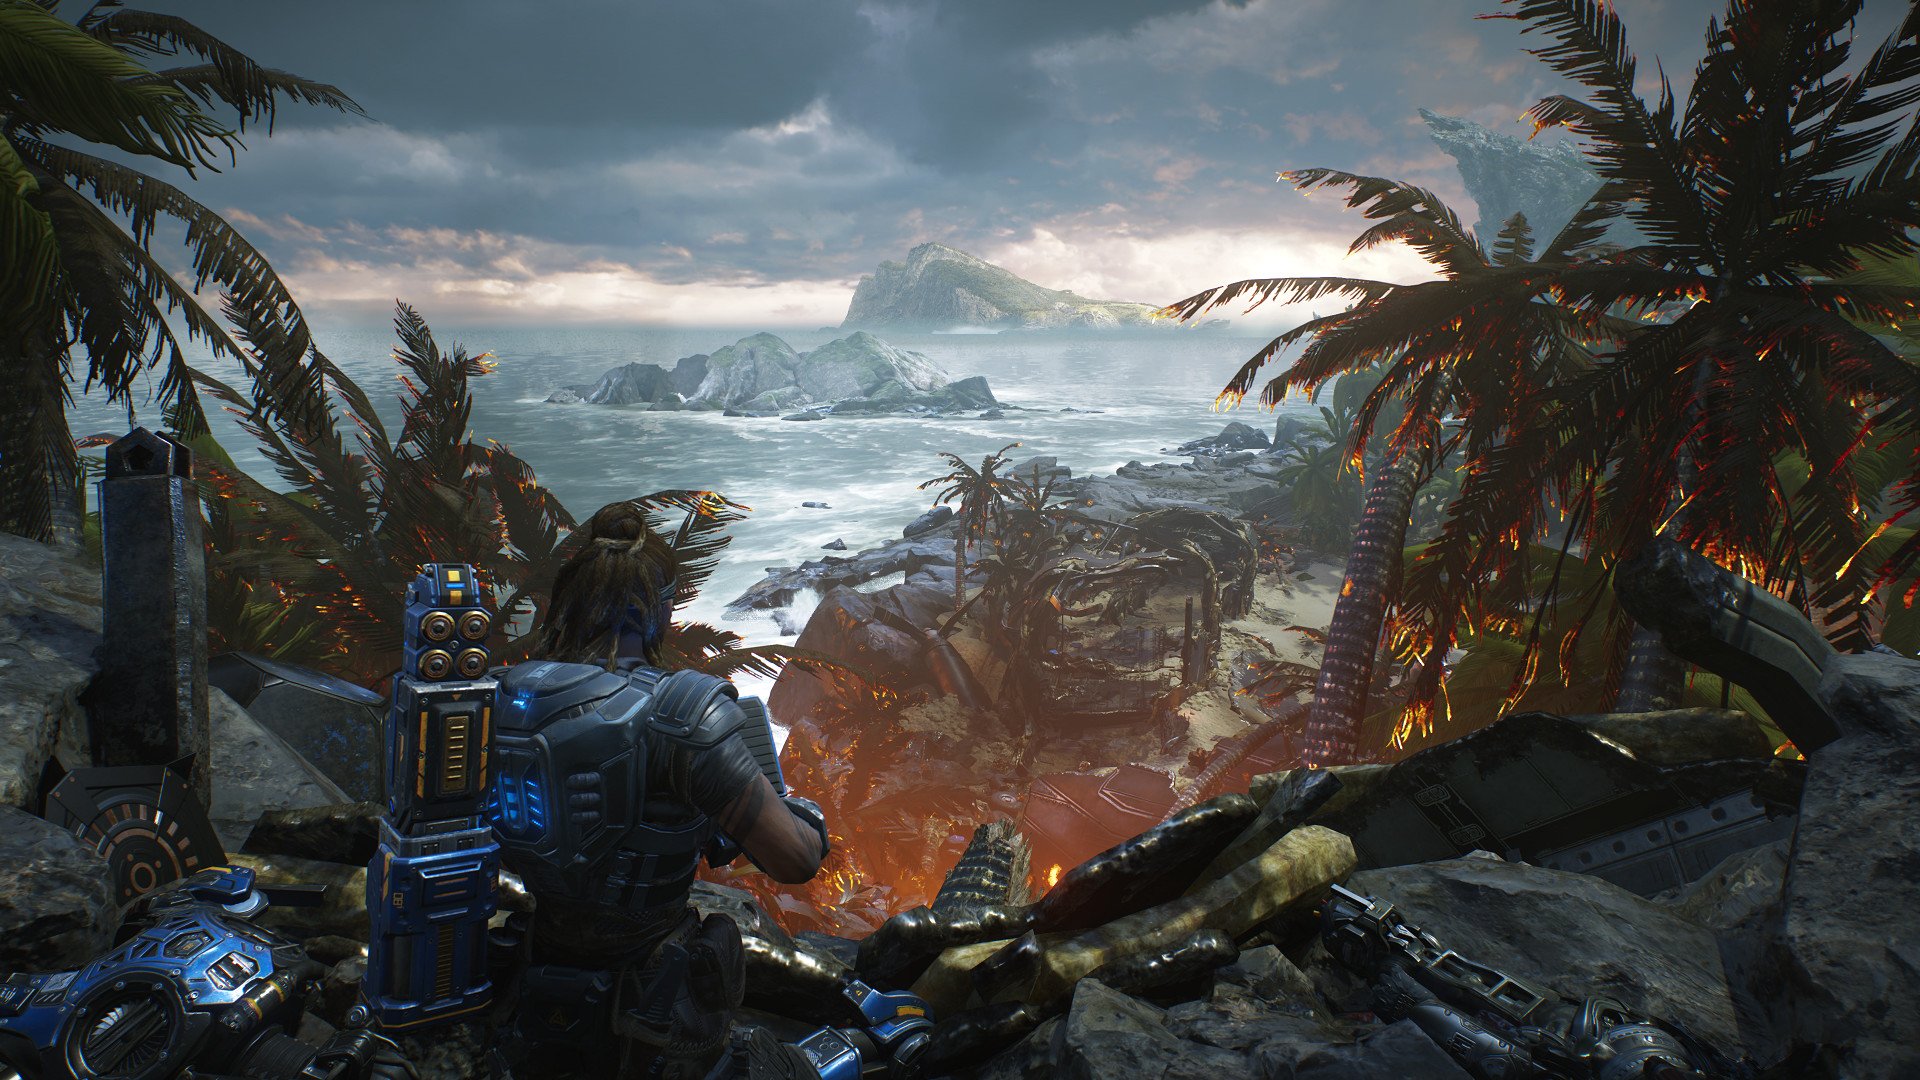 Gears 5 is stunning - but what are the absolute best bits?